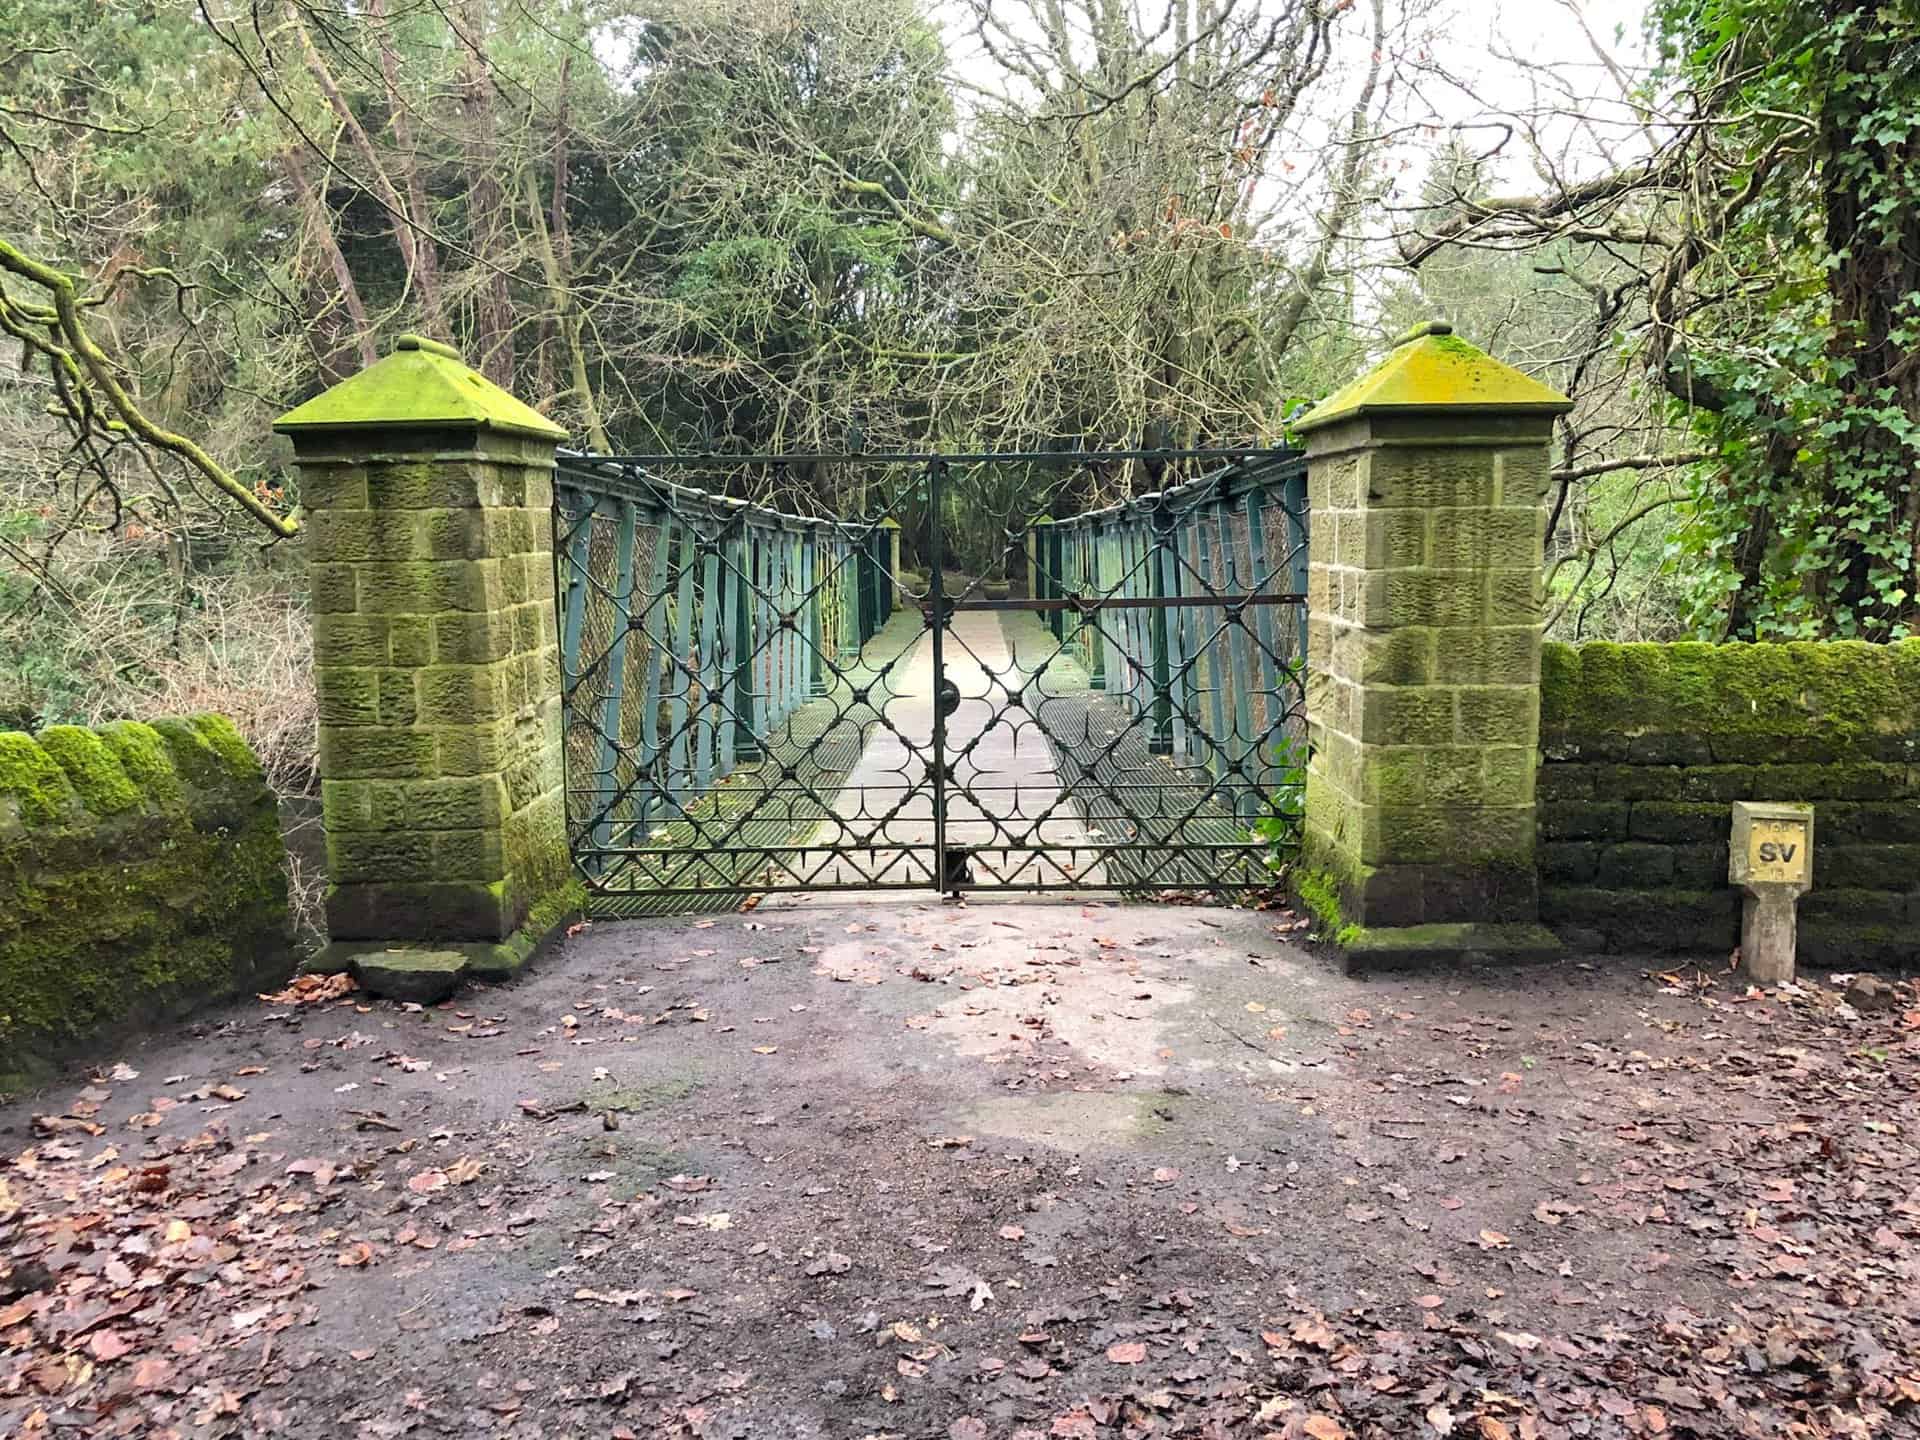 Gated bridge over the River Nidd.